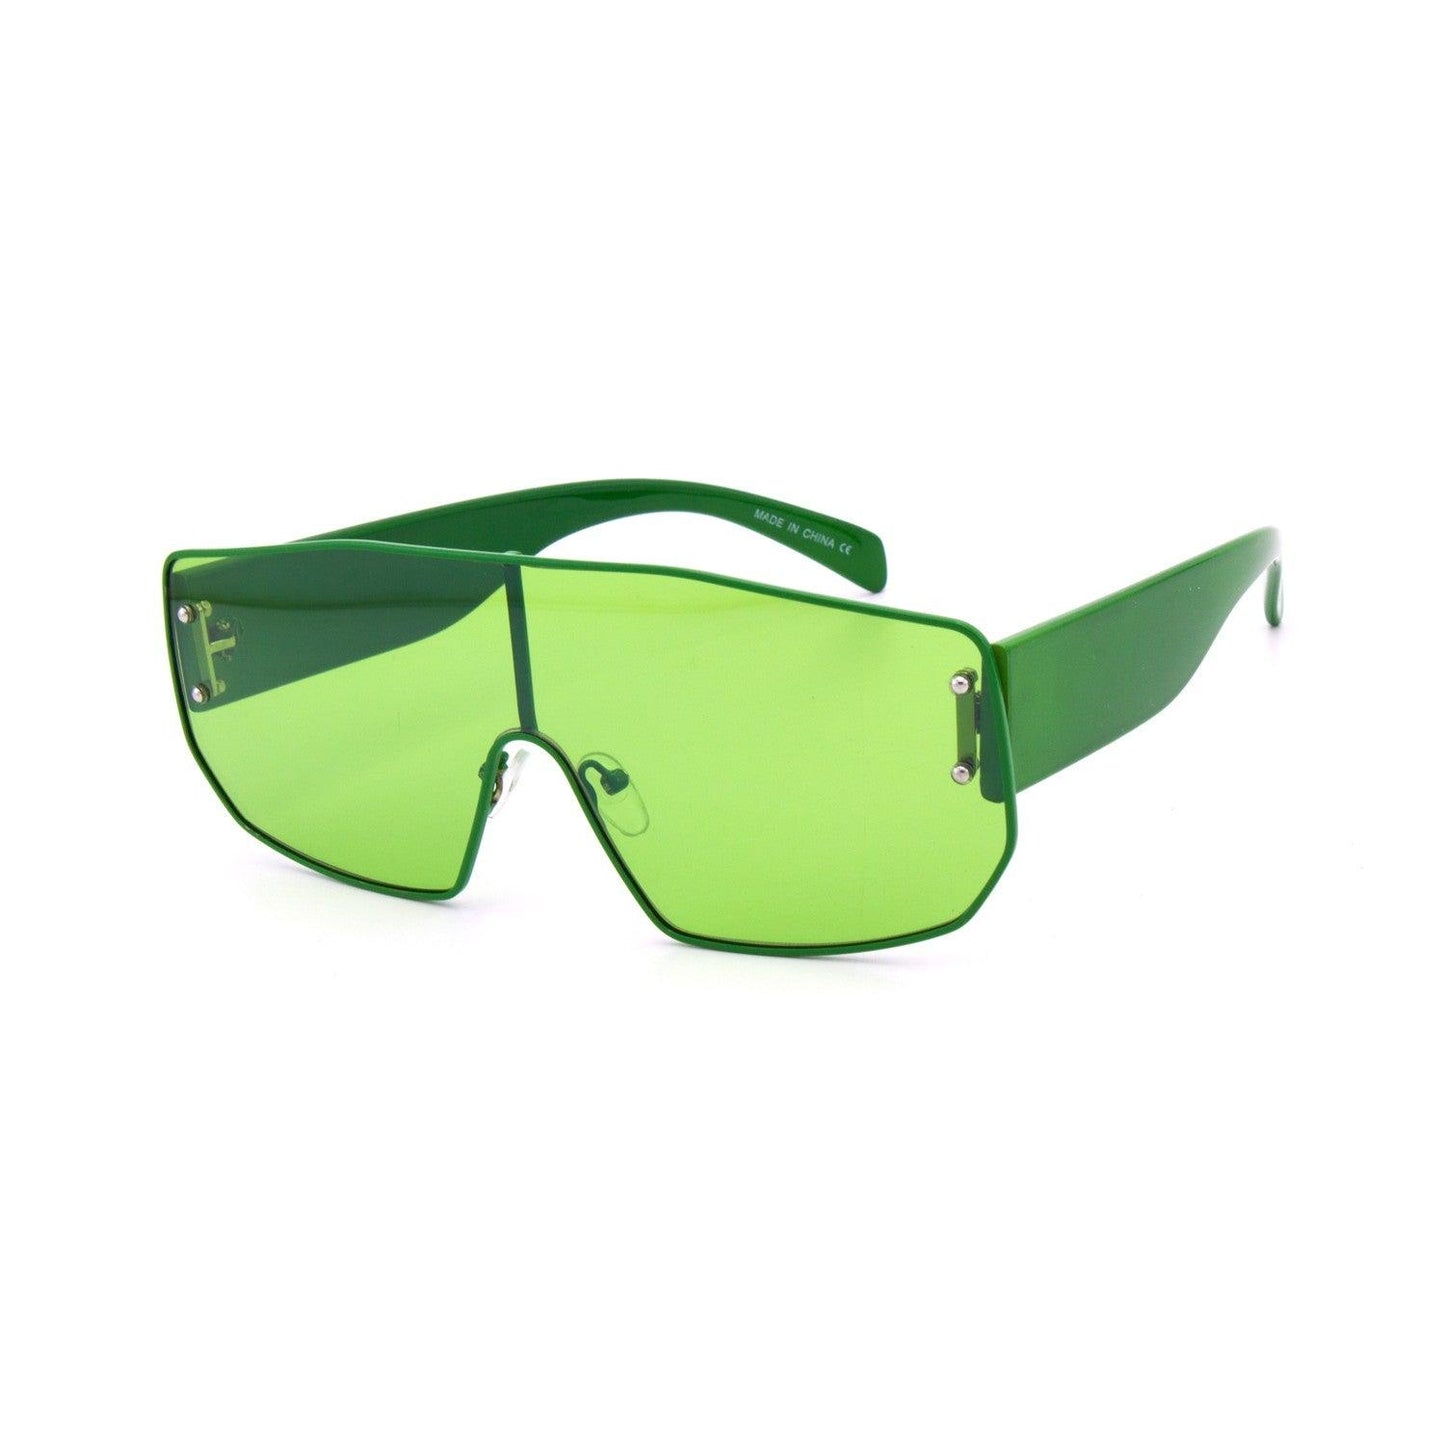 Clear Colorful  Shield Sunglasses - Weekend Shade Sunglasses